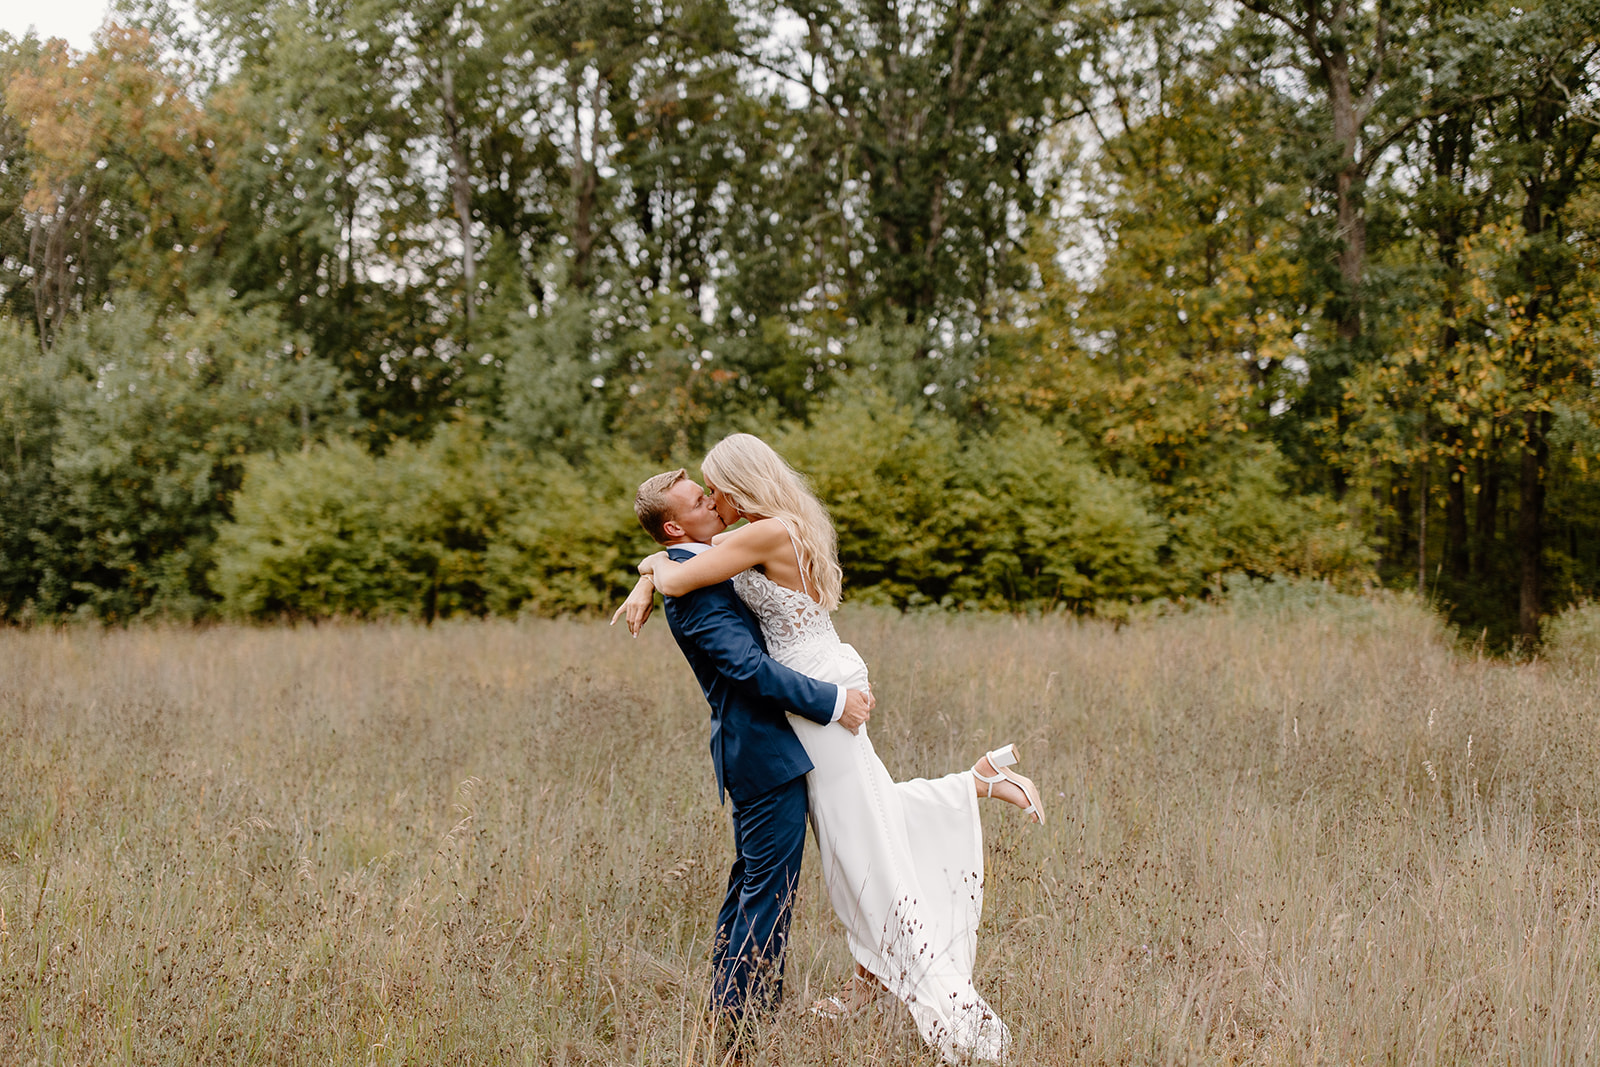 Groom holds his bride in a field of grass